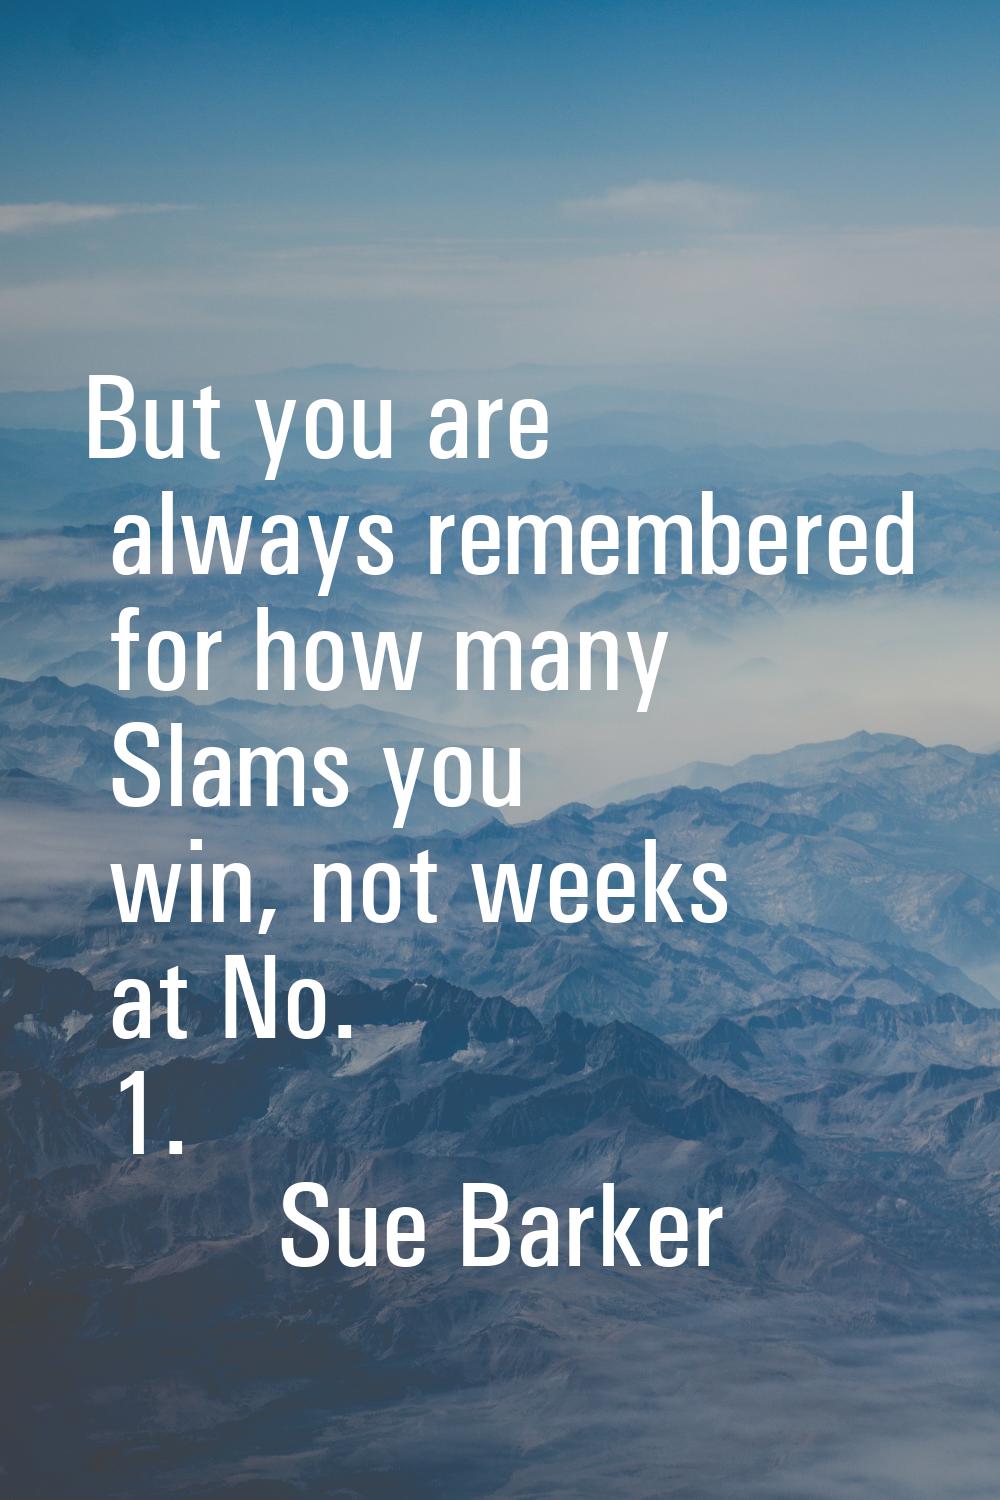 But you are always remembered for how many Slams you win, not weeks at No. 1.